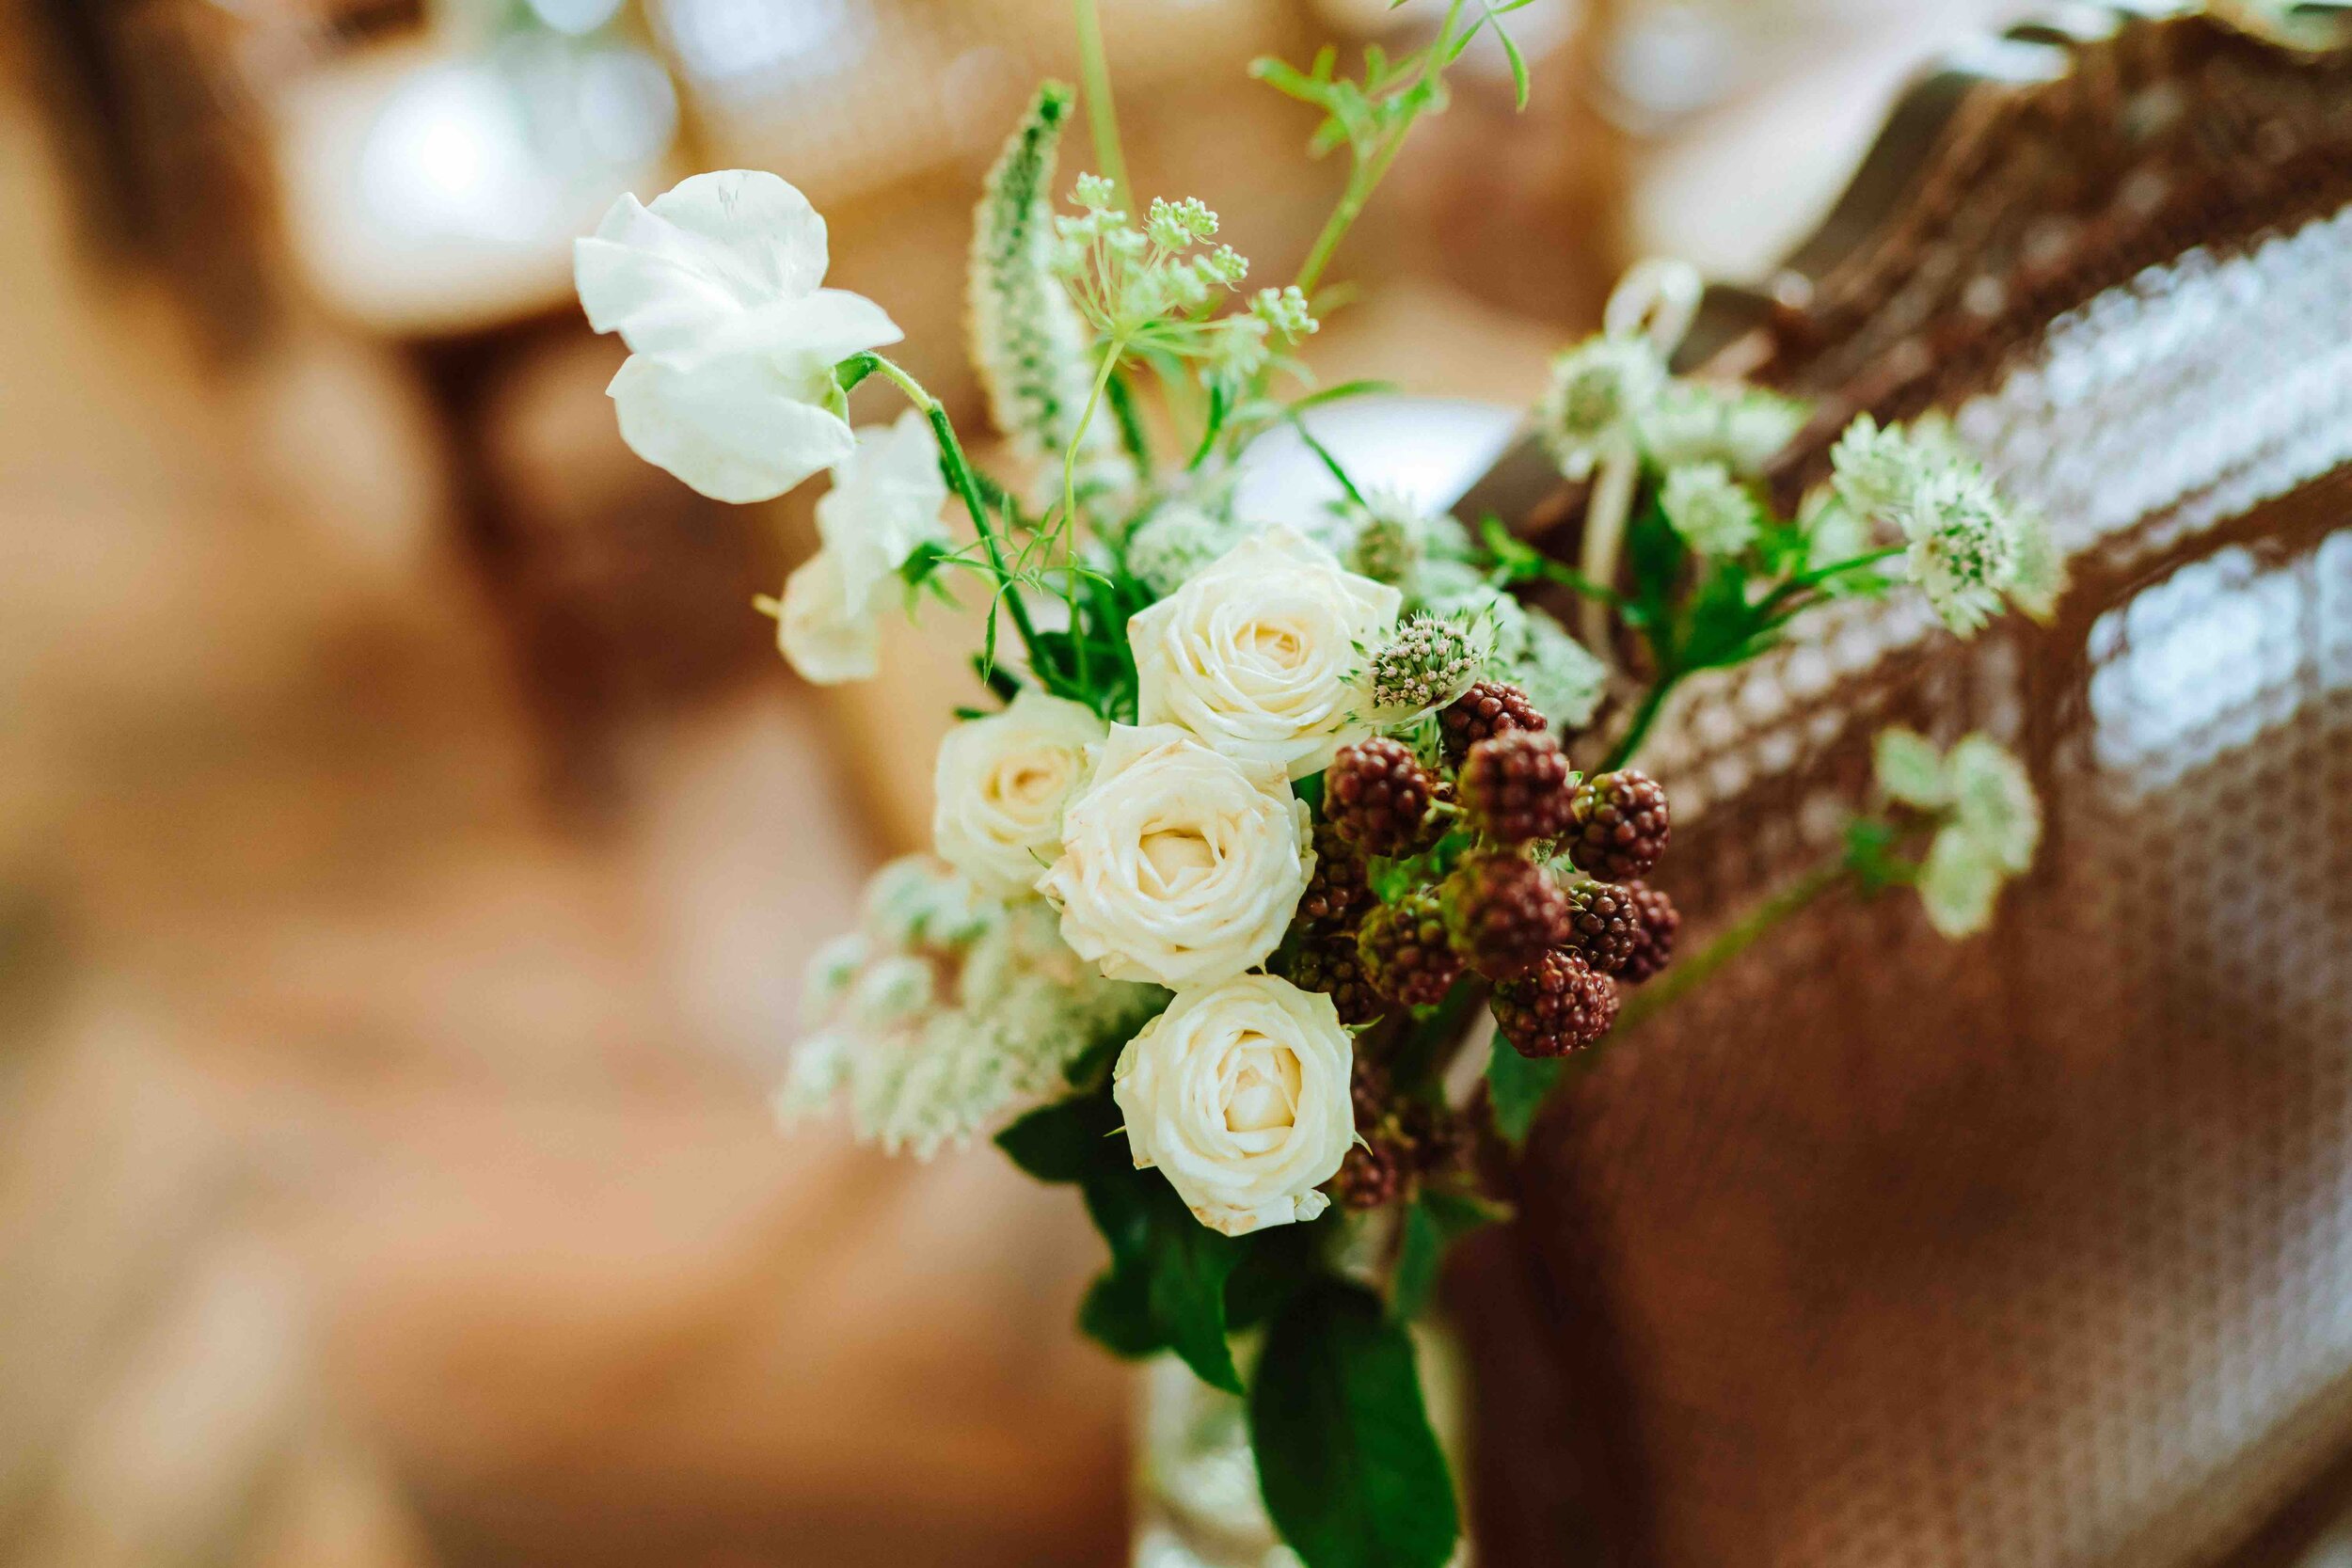 A white vase with flowers decorating a stylish wooden chair for a wedding at the chateau.